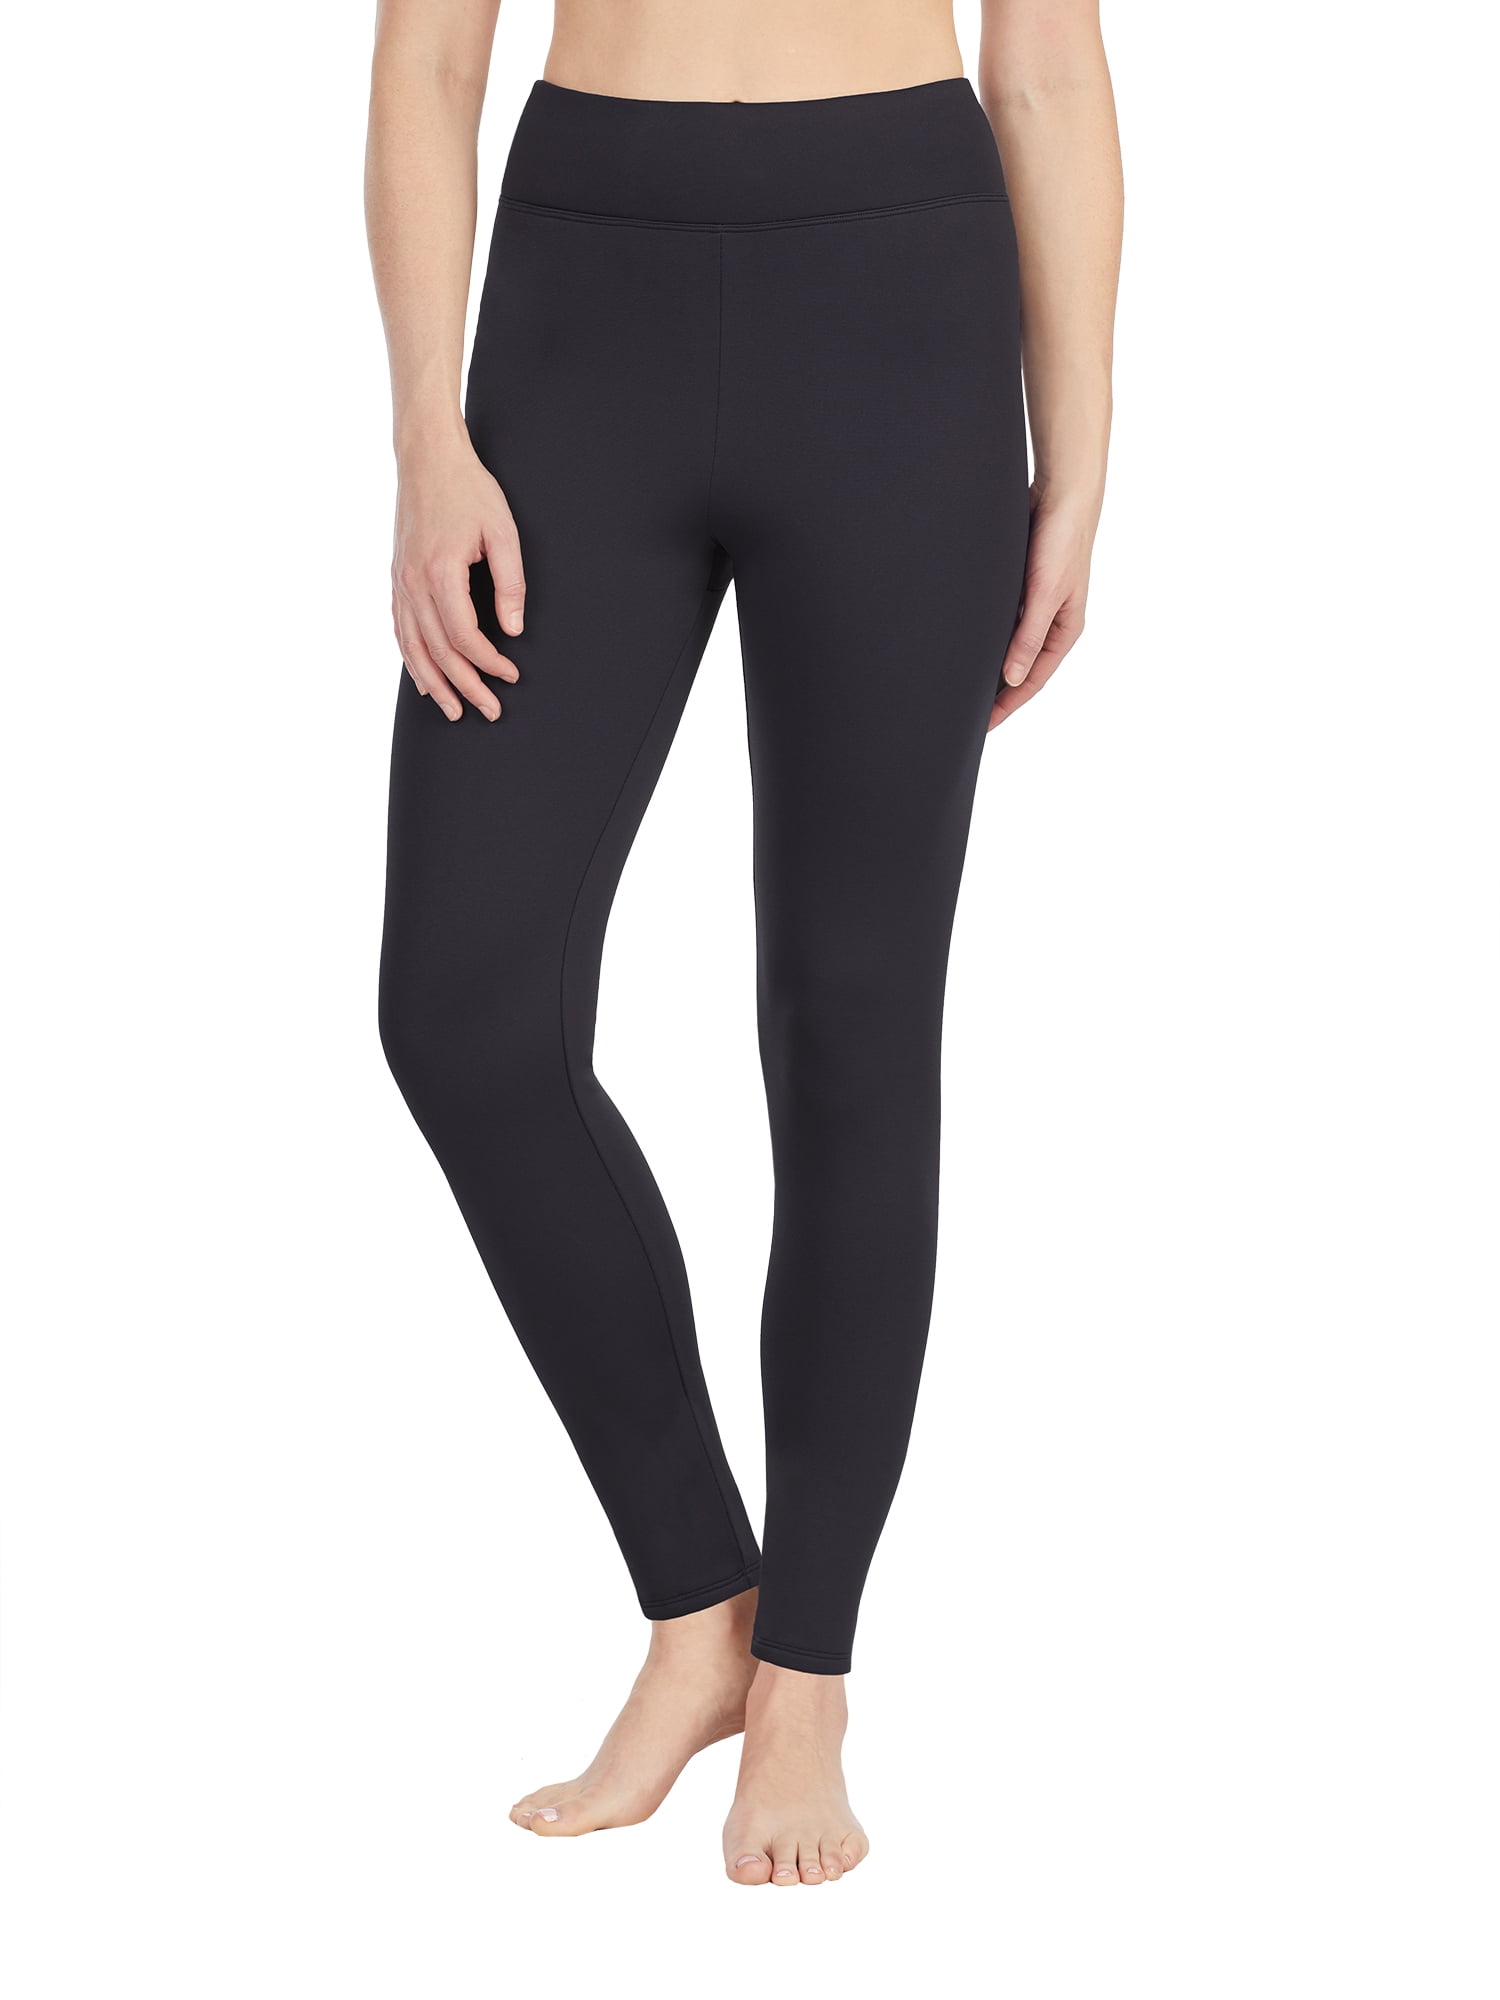 ClimateRight by Cuddl Duds Women's Thermal Guard Base Layer Legging